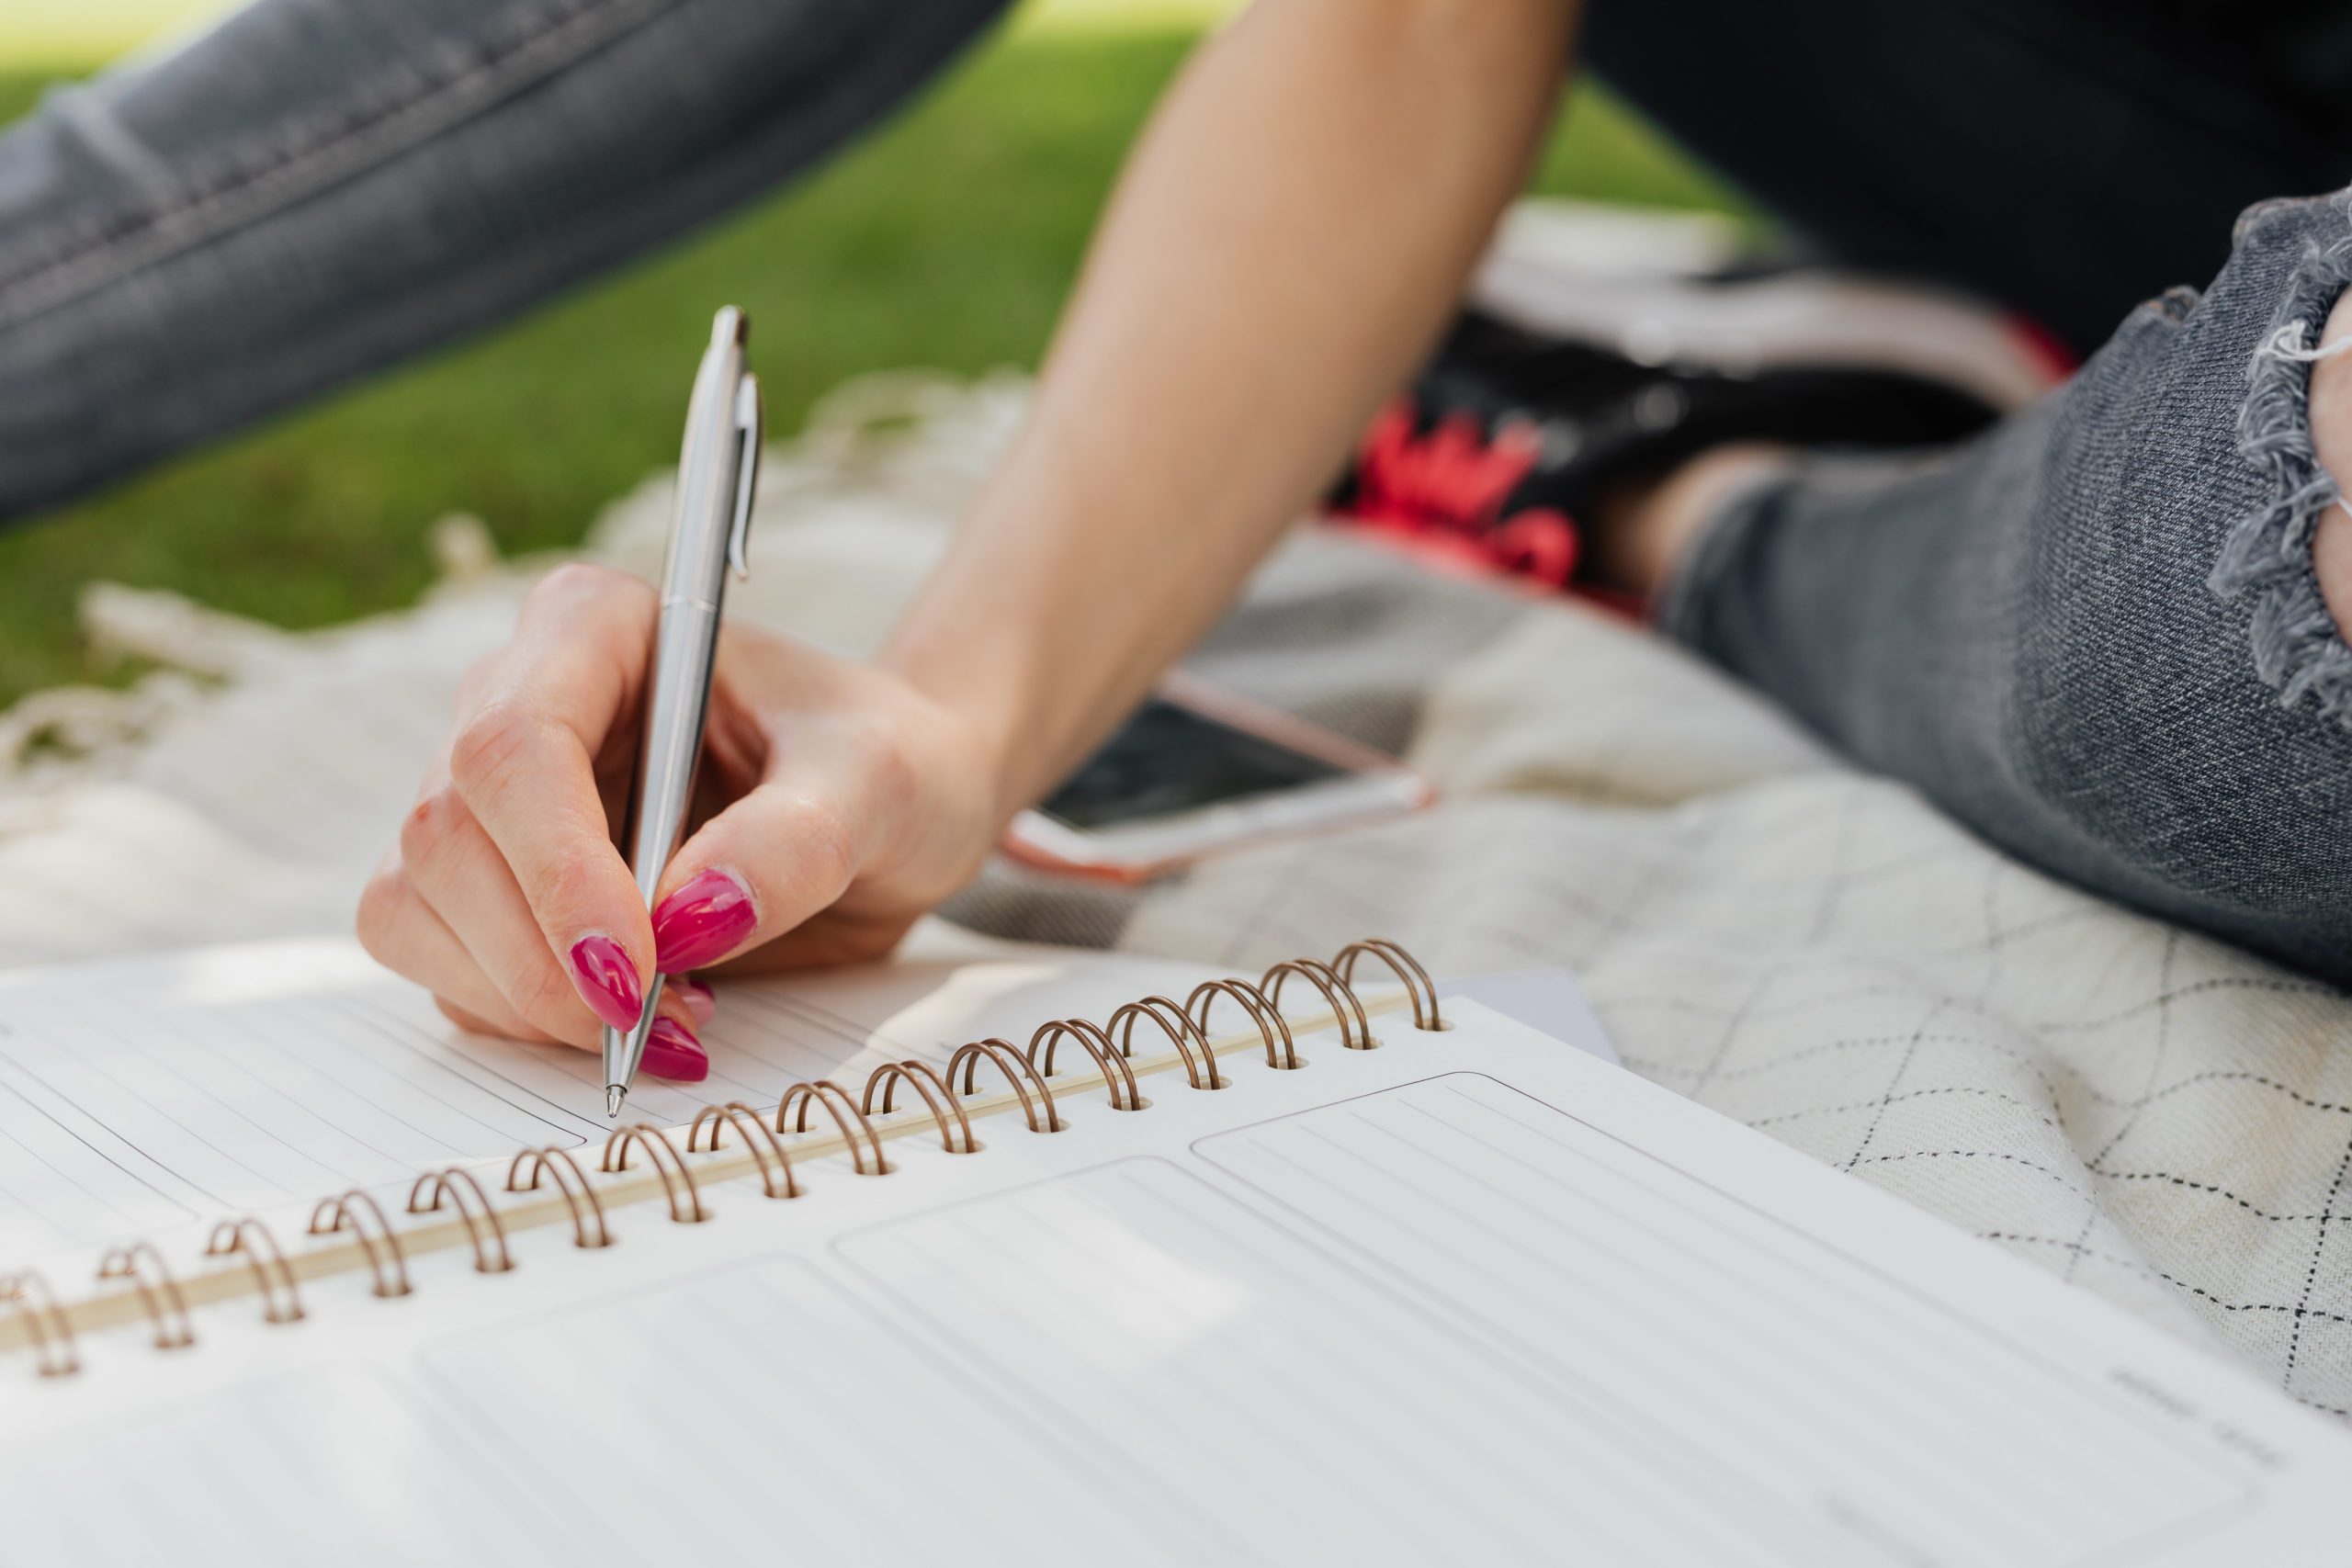 crop-female-noting-down-daily-plans-in-notebook-in-park-4497758